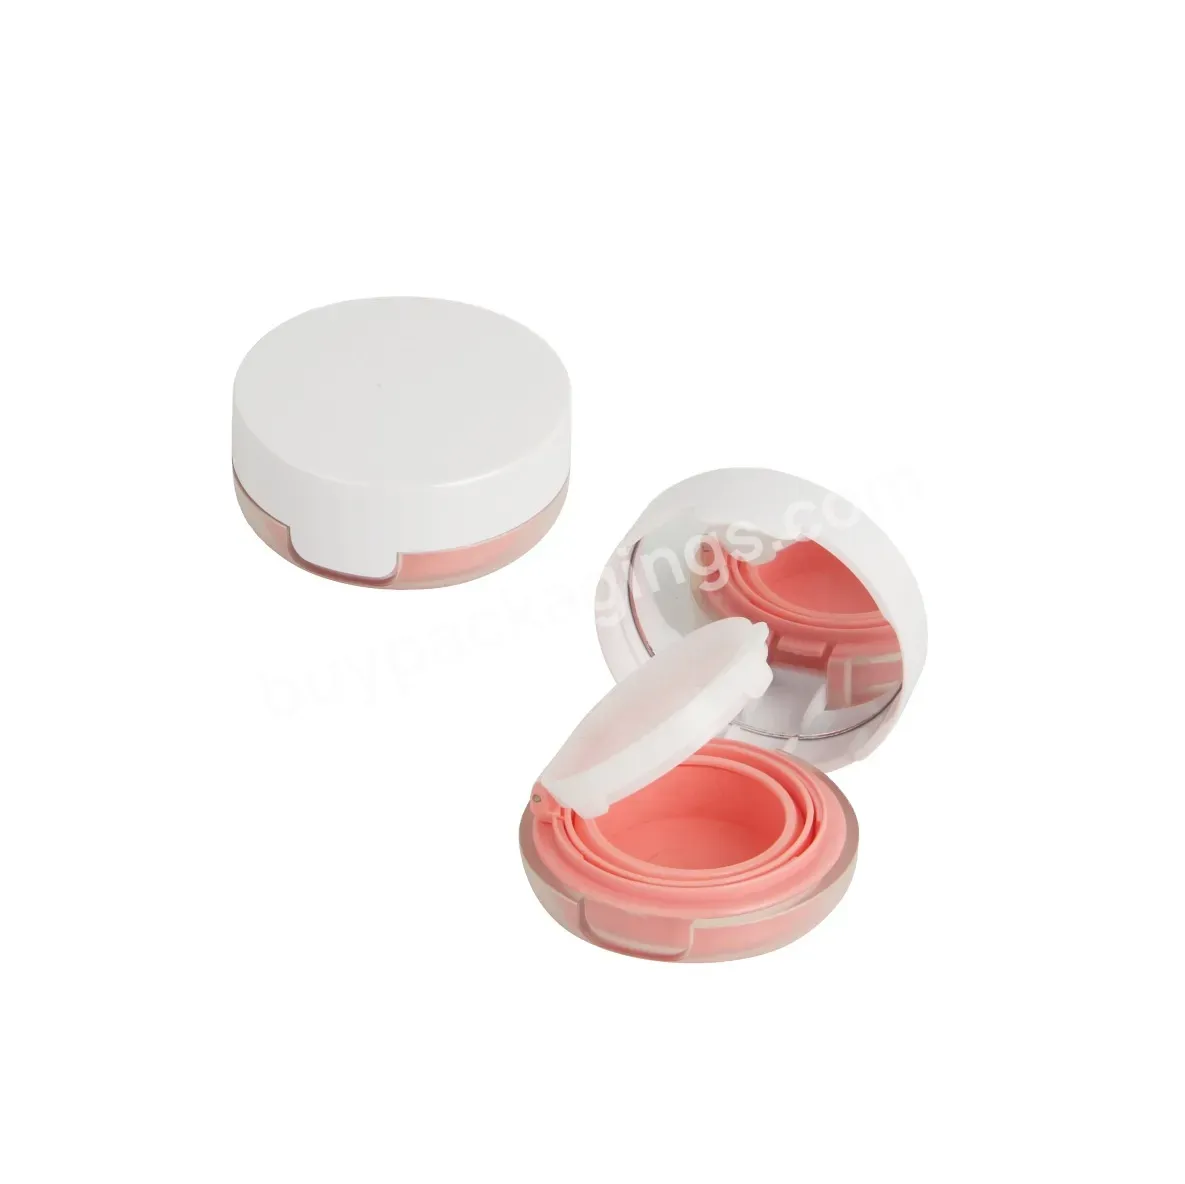 Private Label E7701# Replaceable Air Cushion Liquid Blusher Plastic Packaging Empty Container Case - Buy Air Cushion Liquid Blusher Plastic Packaging,Air Cushion Blusher Empty Container,Liquid Blusher Plastic Packaging.